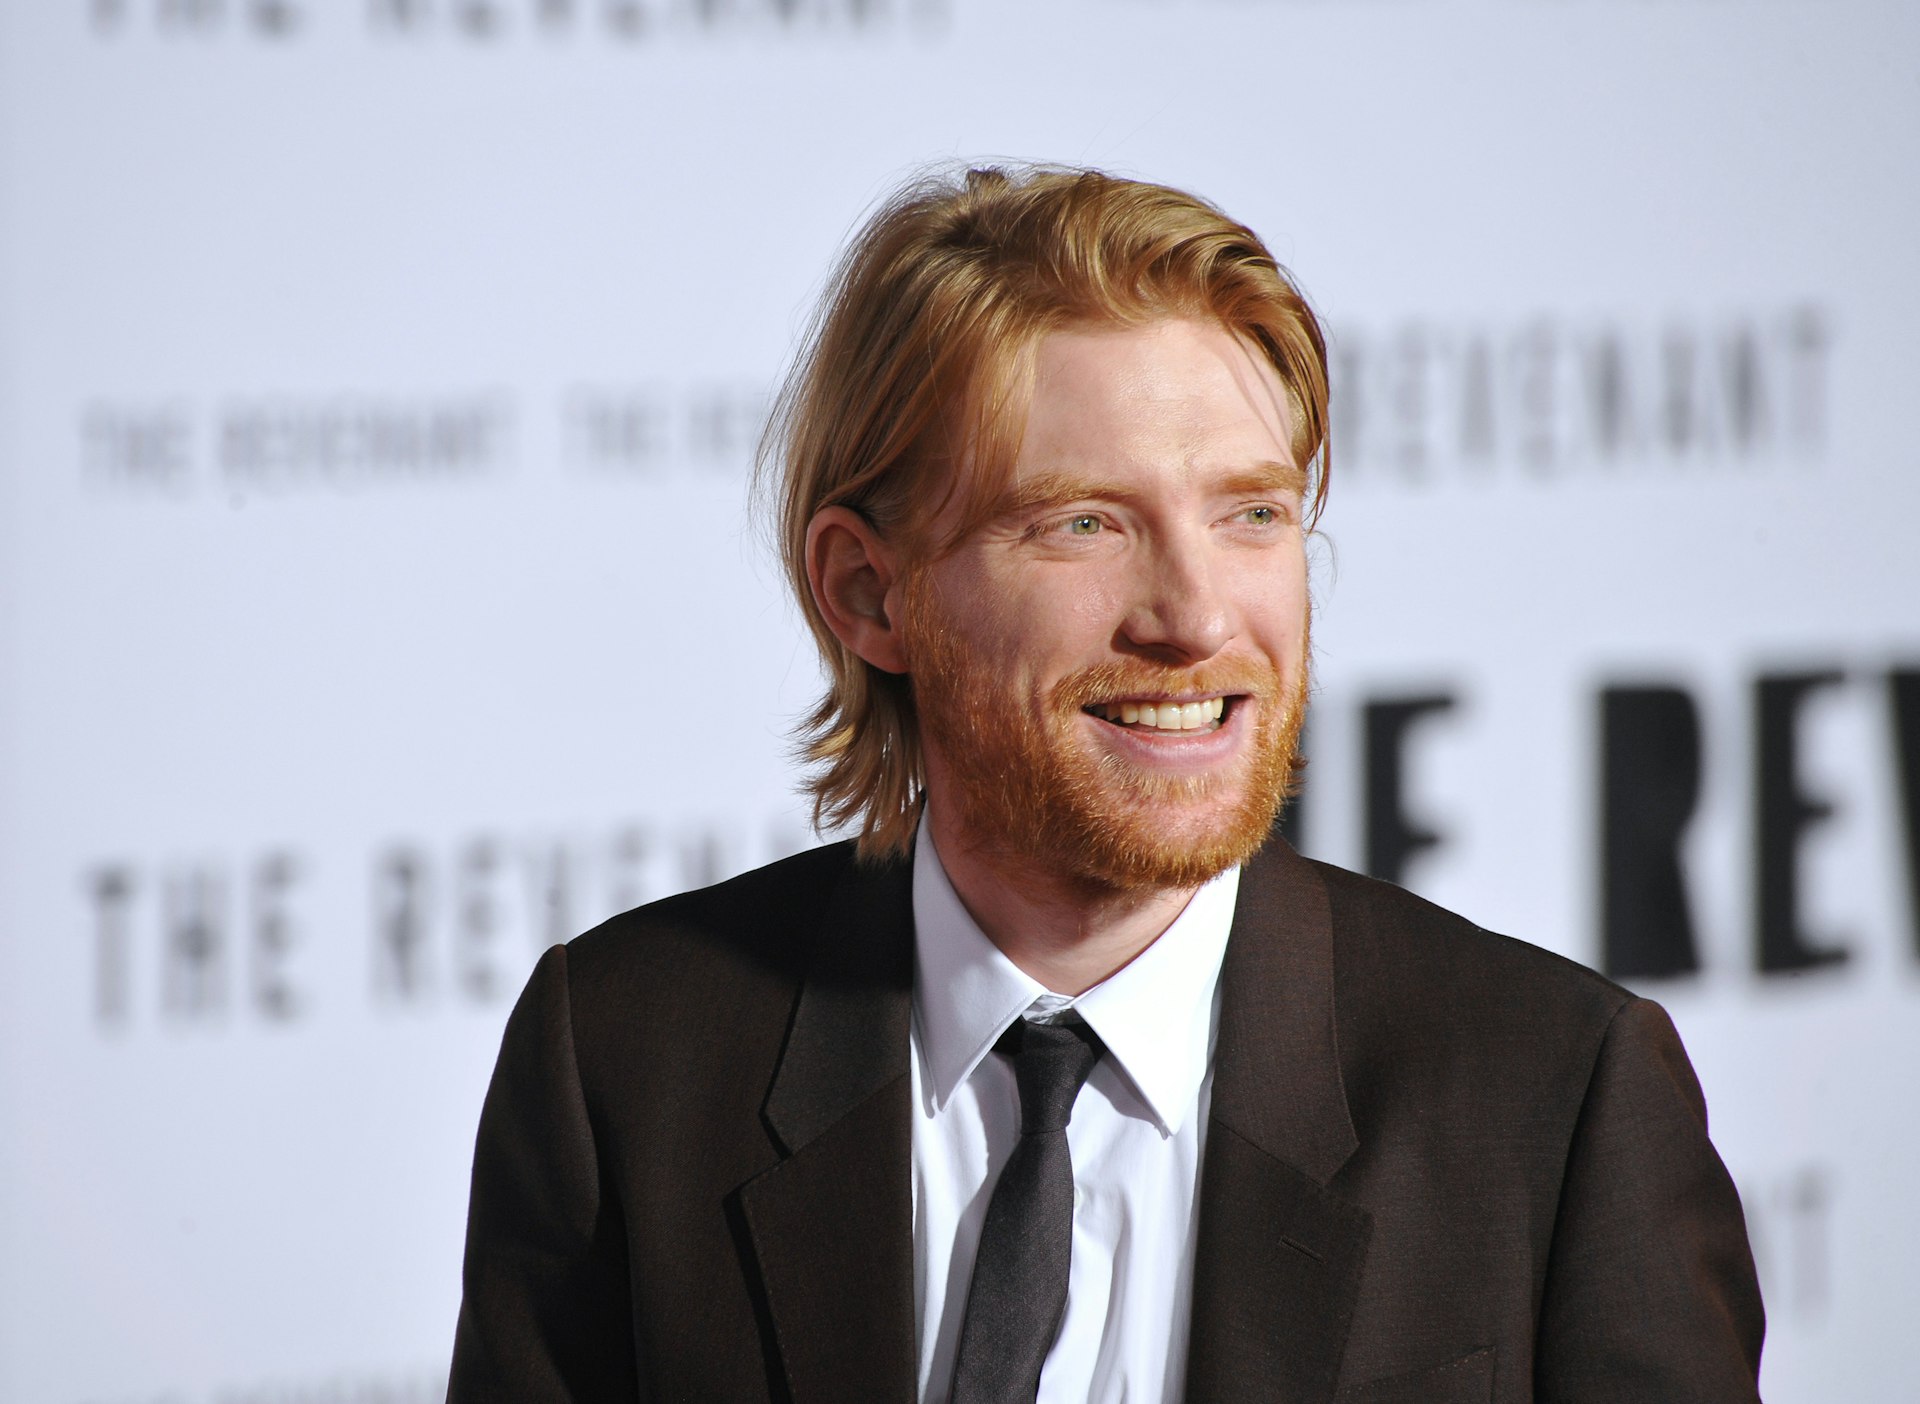 Actor Domhnall Gleeson at the Los Angeles premiere of movie "The Revenant" at the TCL Chinese Theatre, Hollywood.